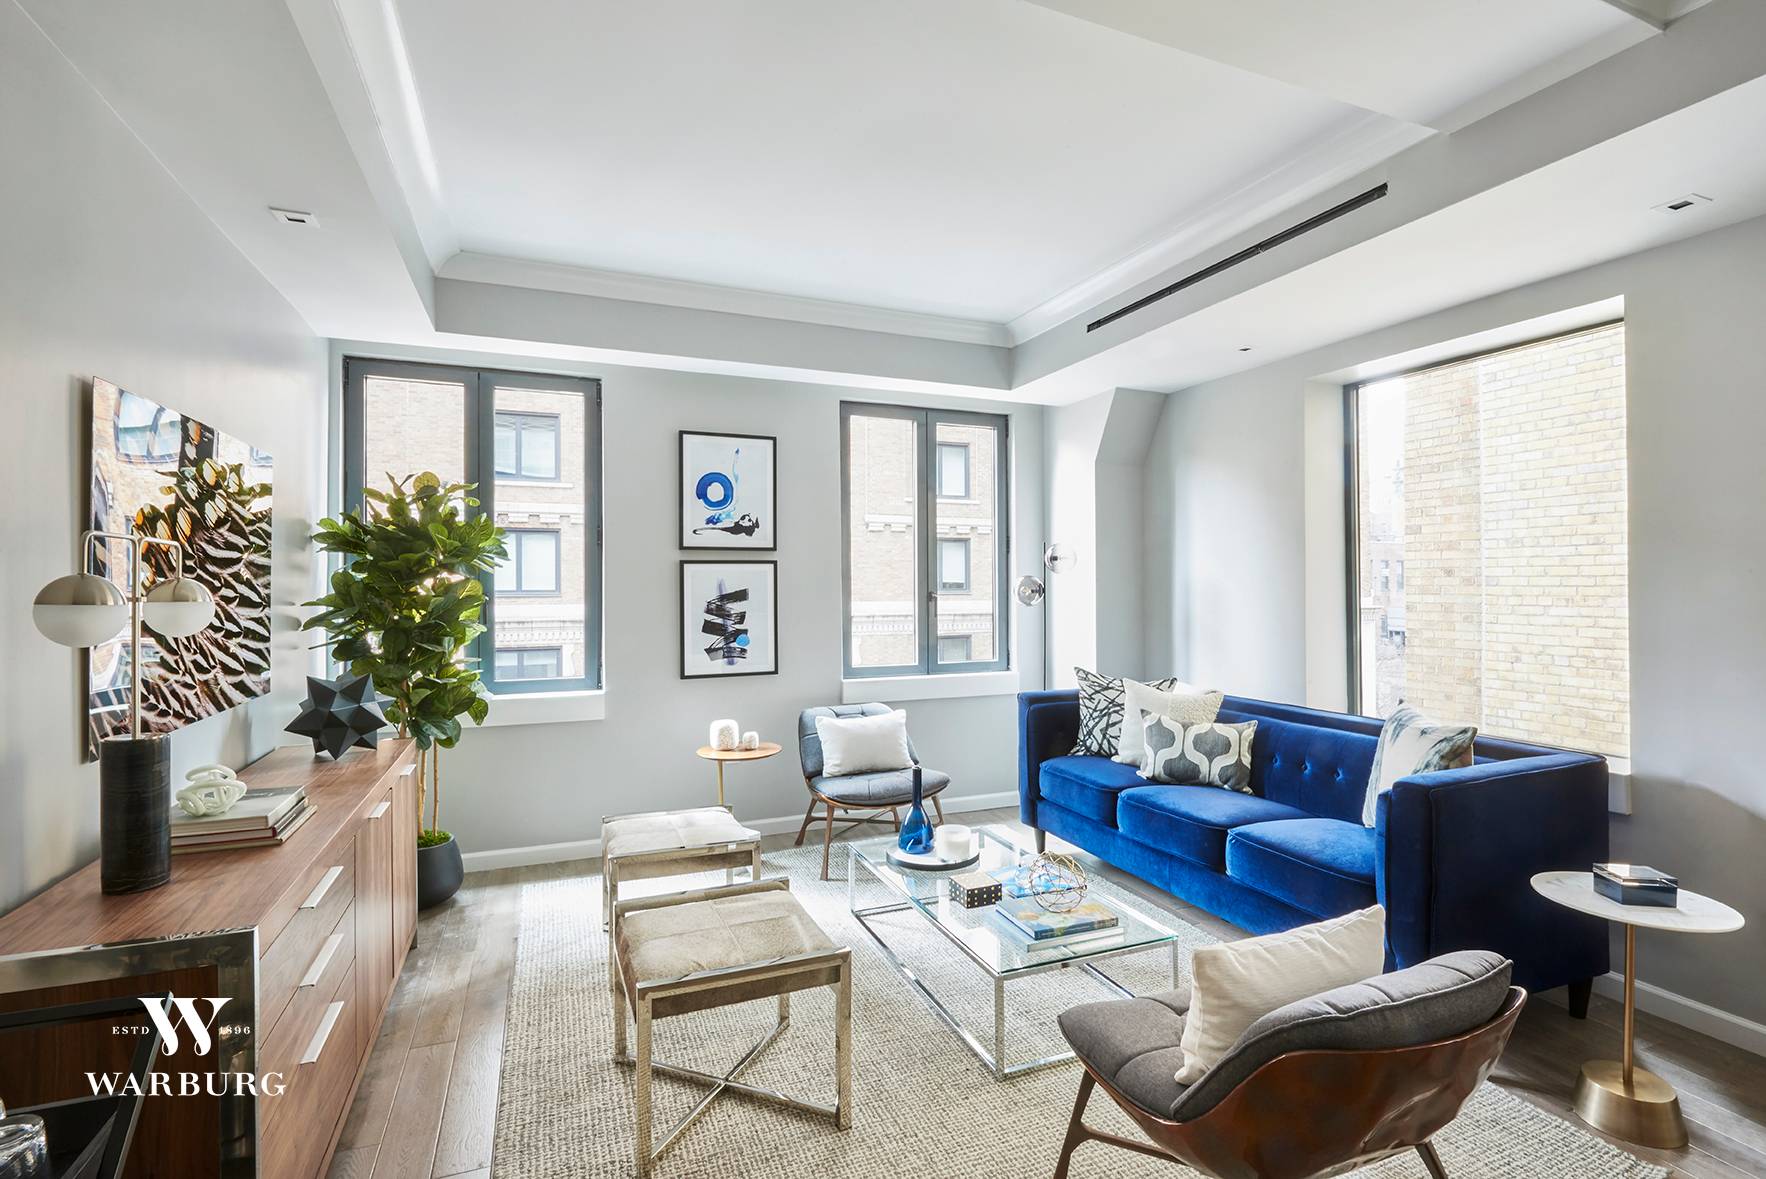 Residence 3 at 207 West 75th Street, a brand new boutique development on the Upper West Side, is a full floor, 1, 923 square foot three bedroom with a private ...